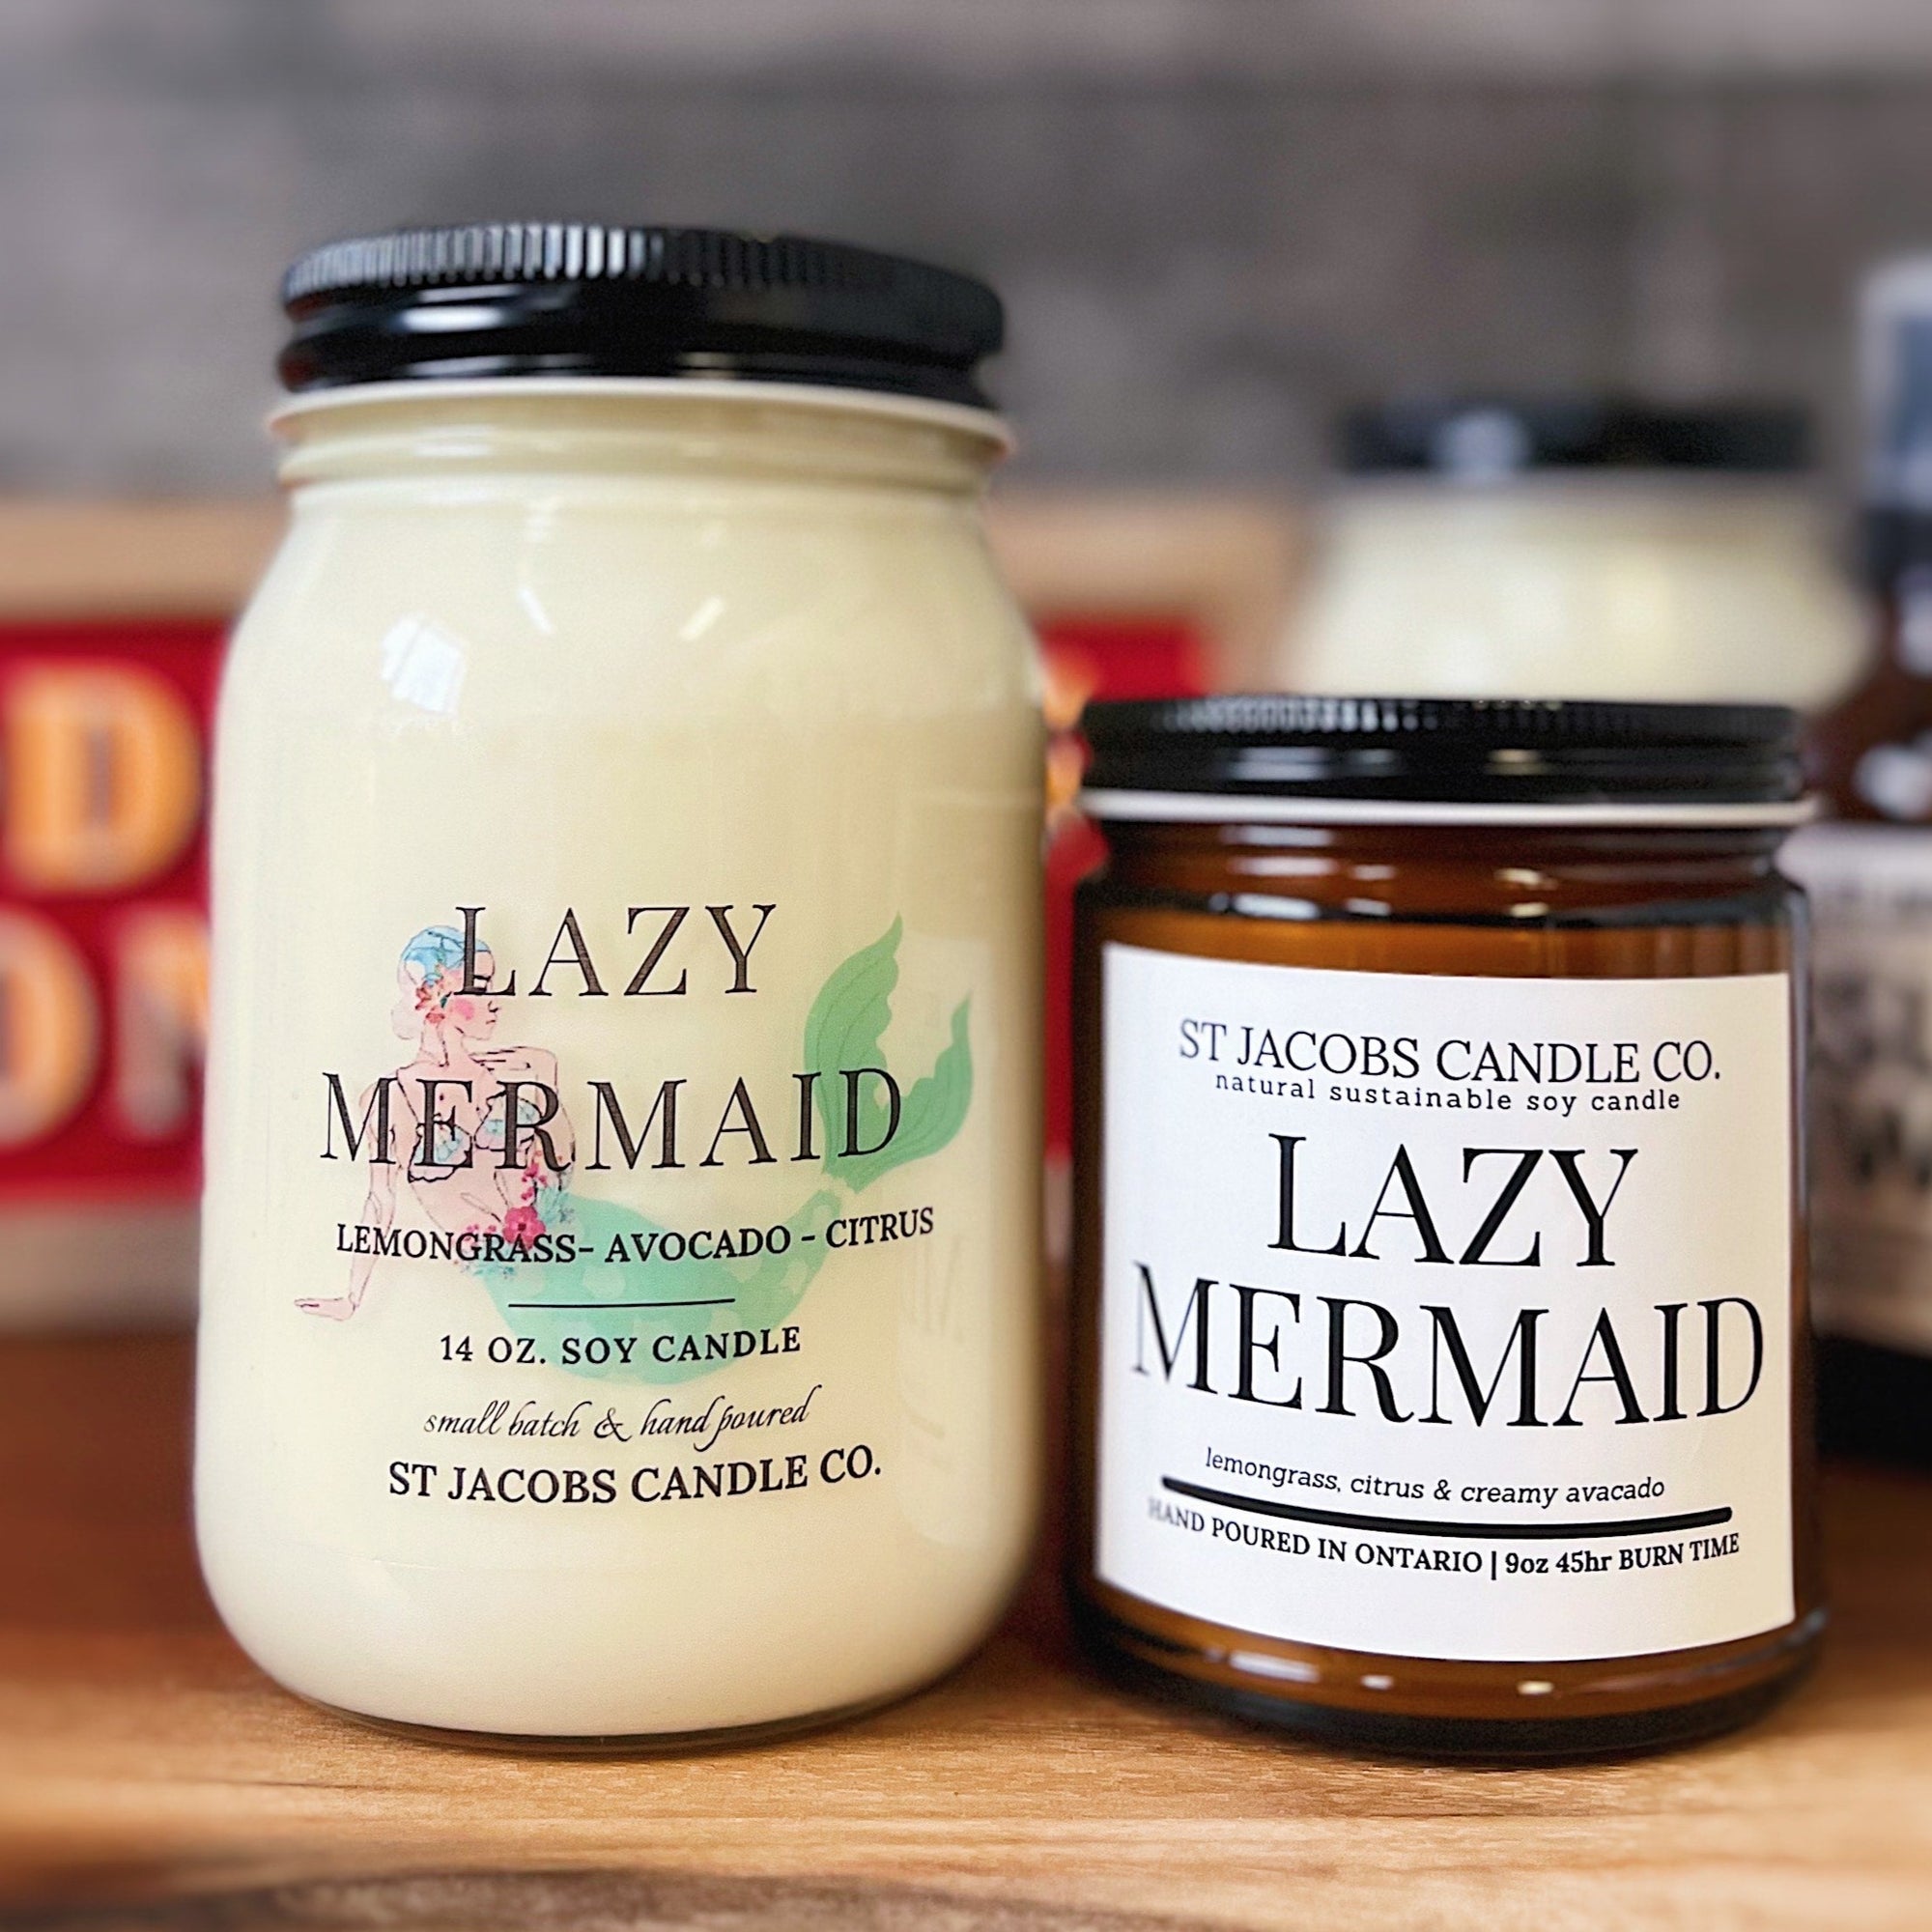 "LAZY MERMAID" Natural Soy Candle